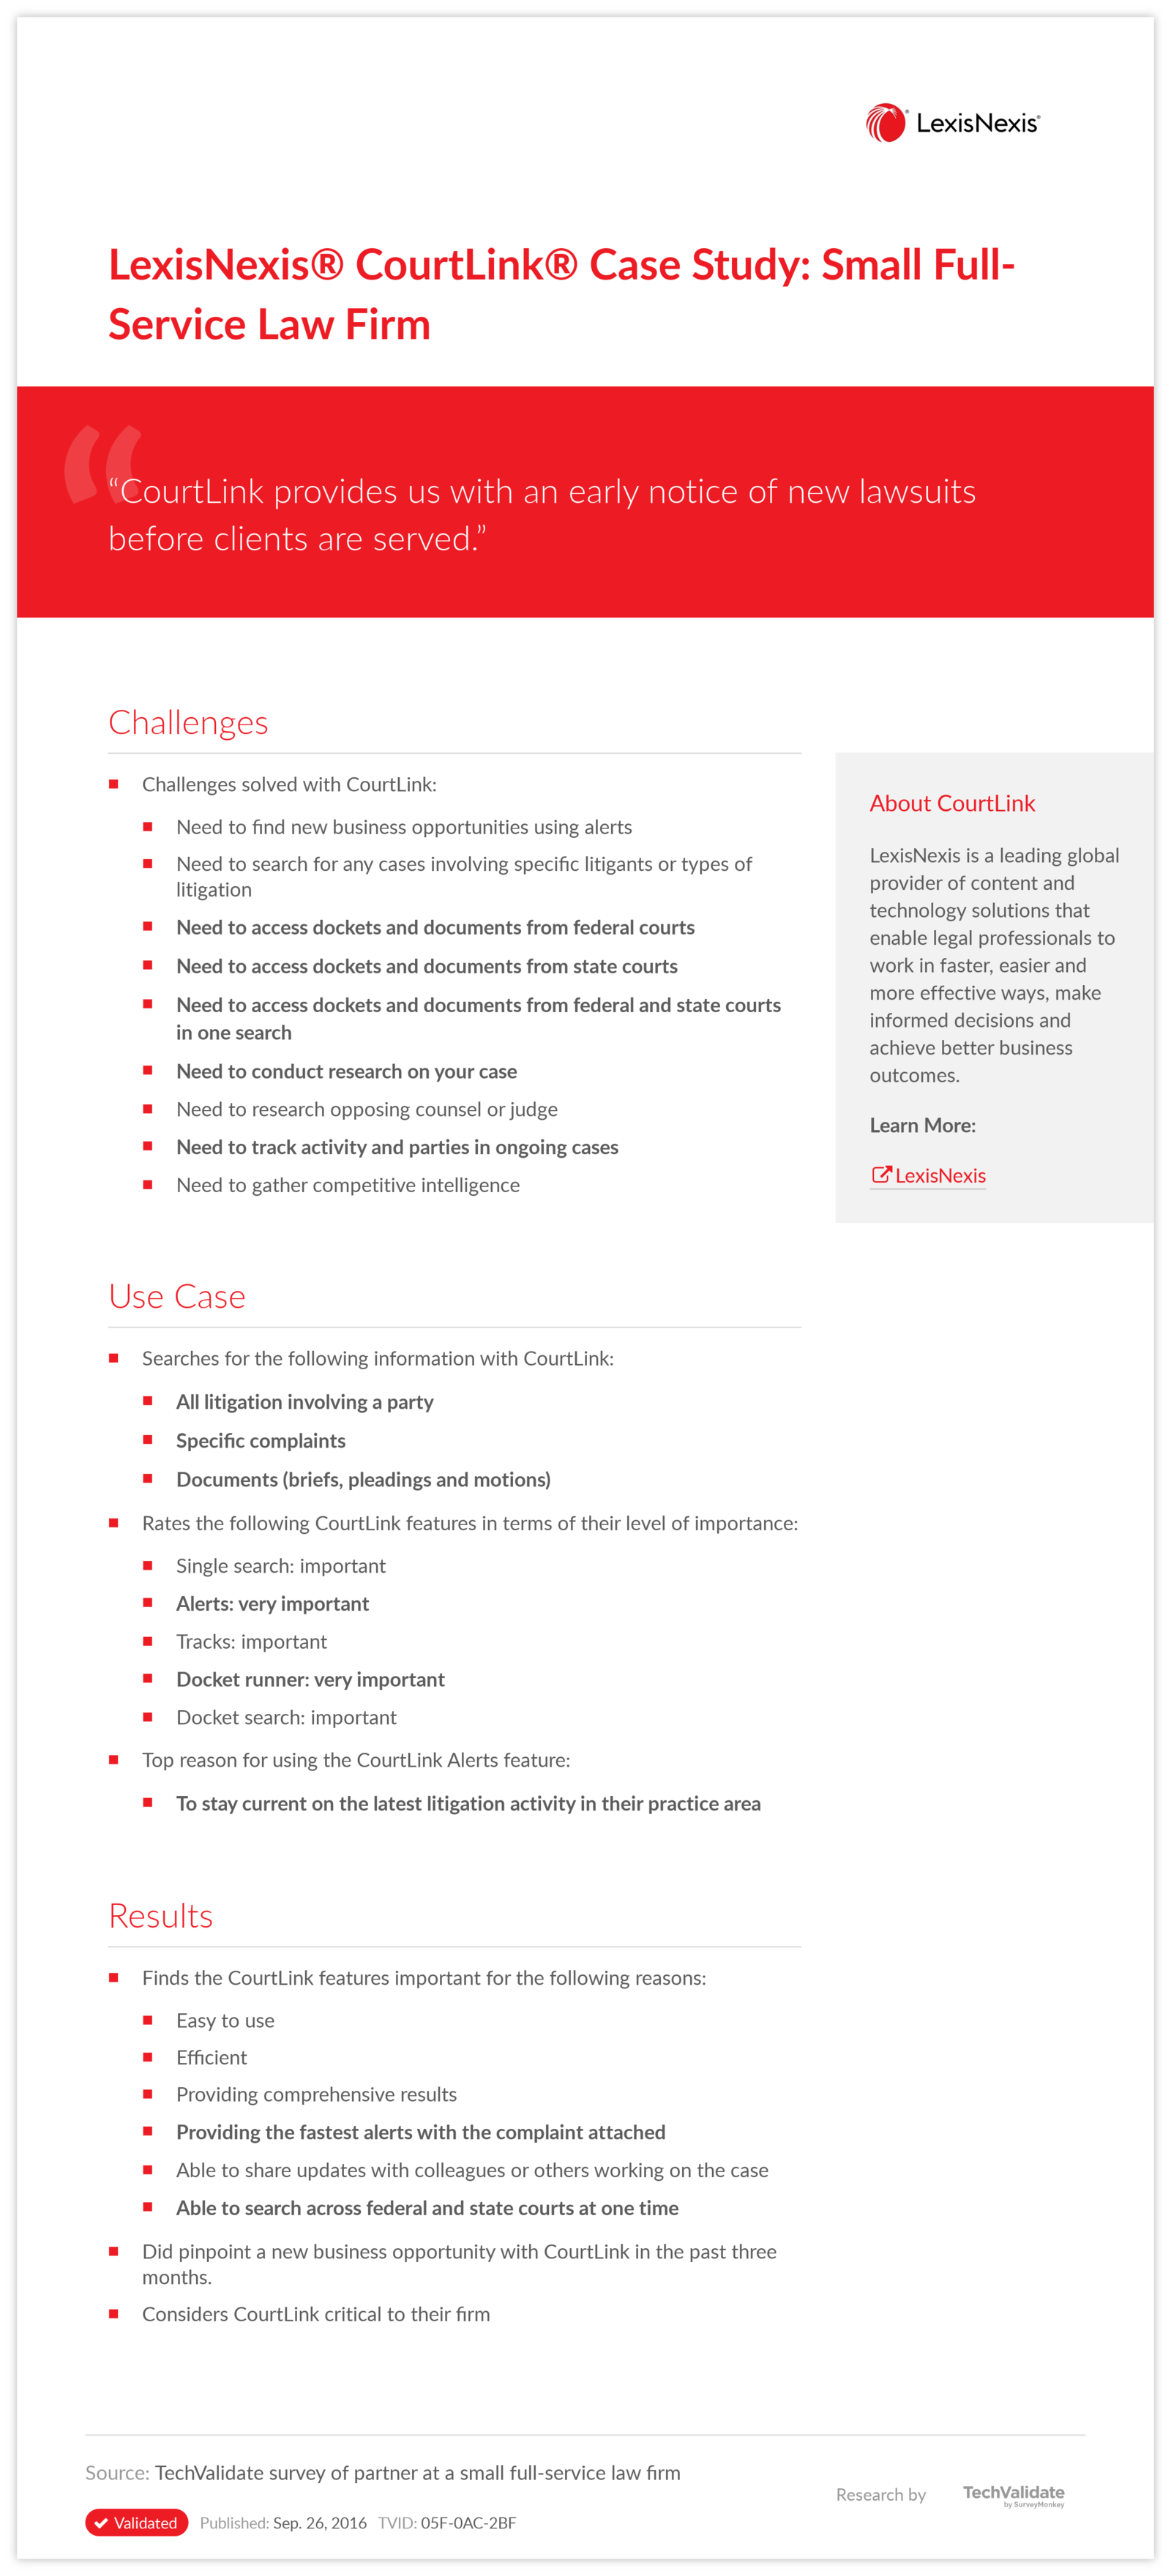 LexisNexis® CourtLink® Case Study: Small Full-Service Law Firm